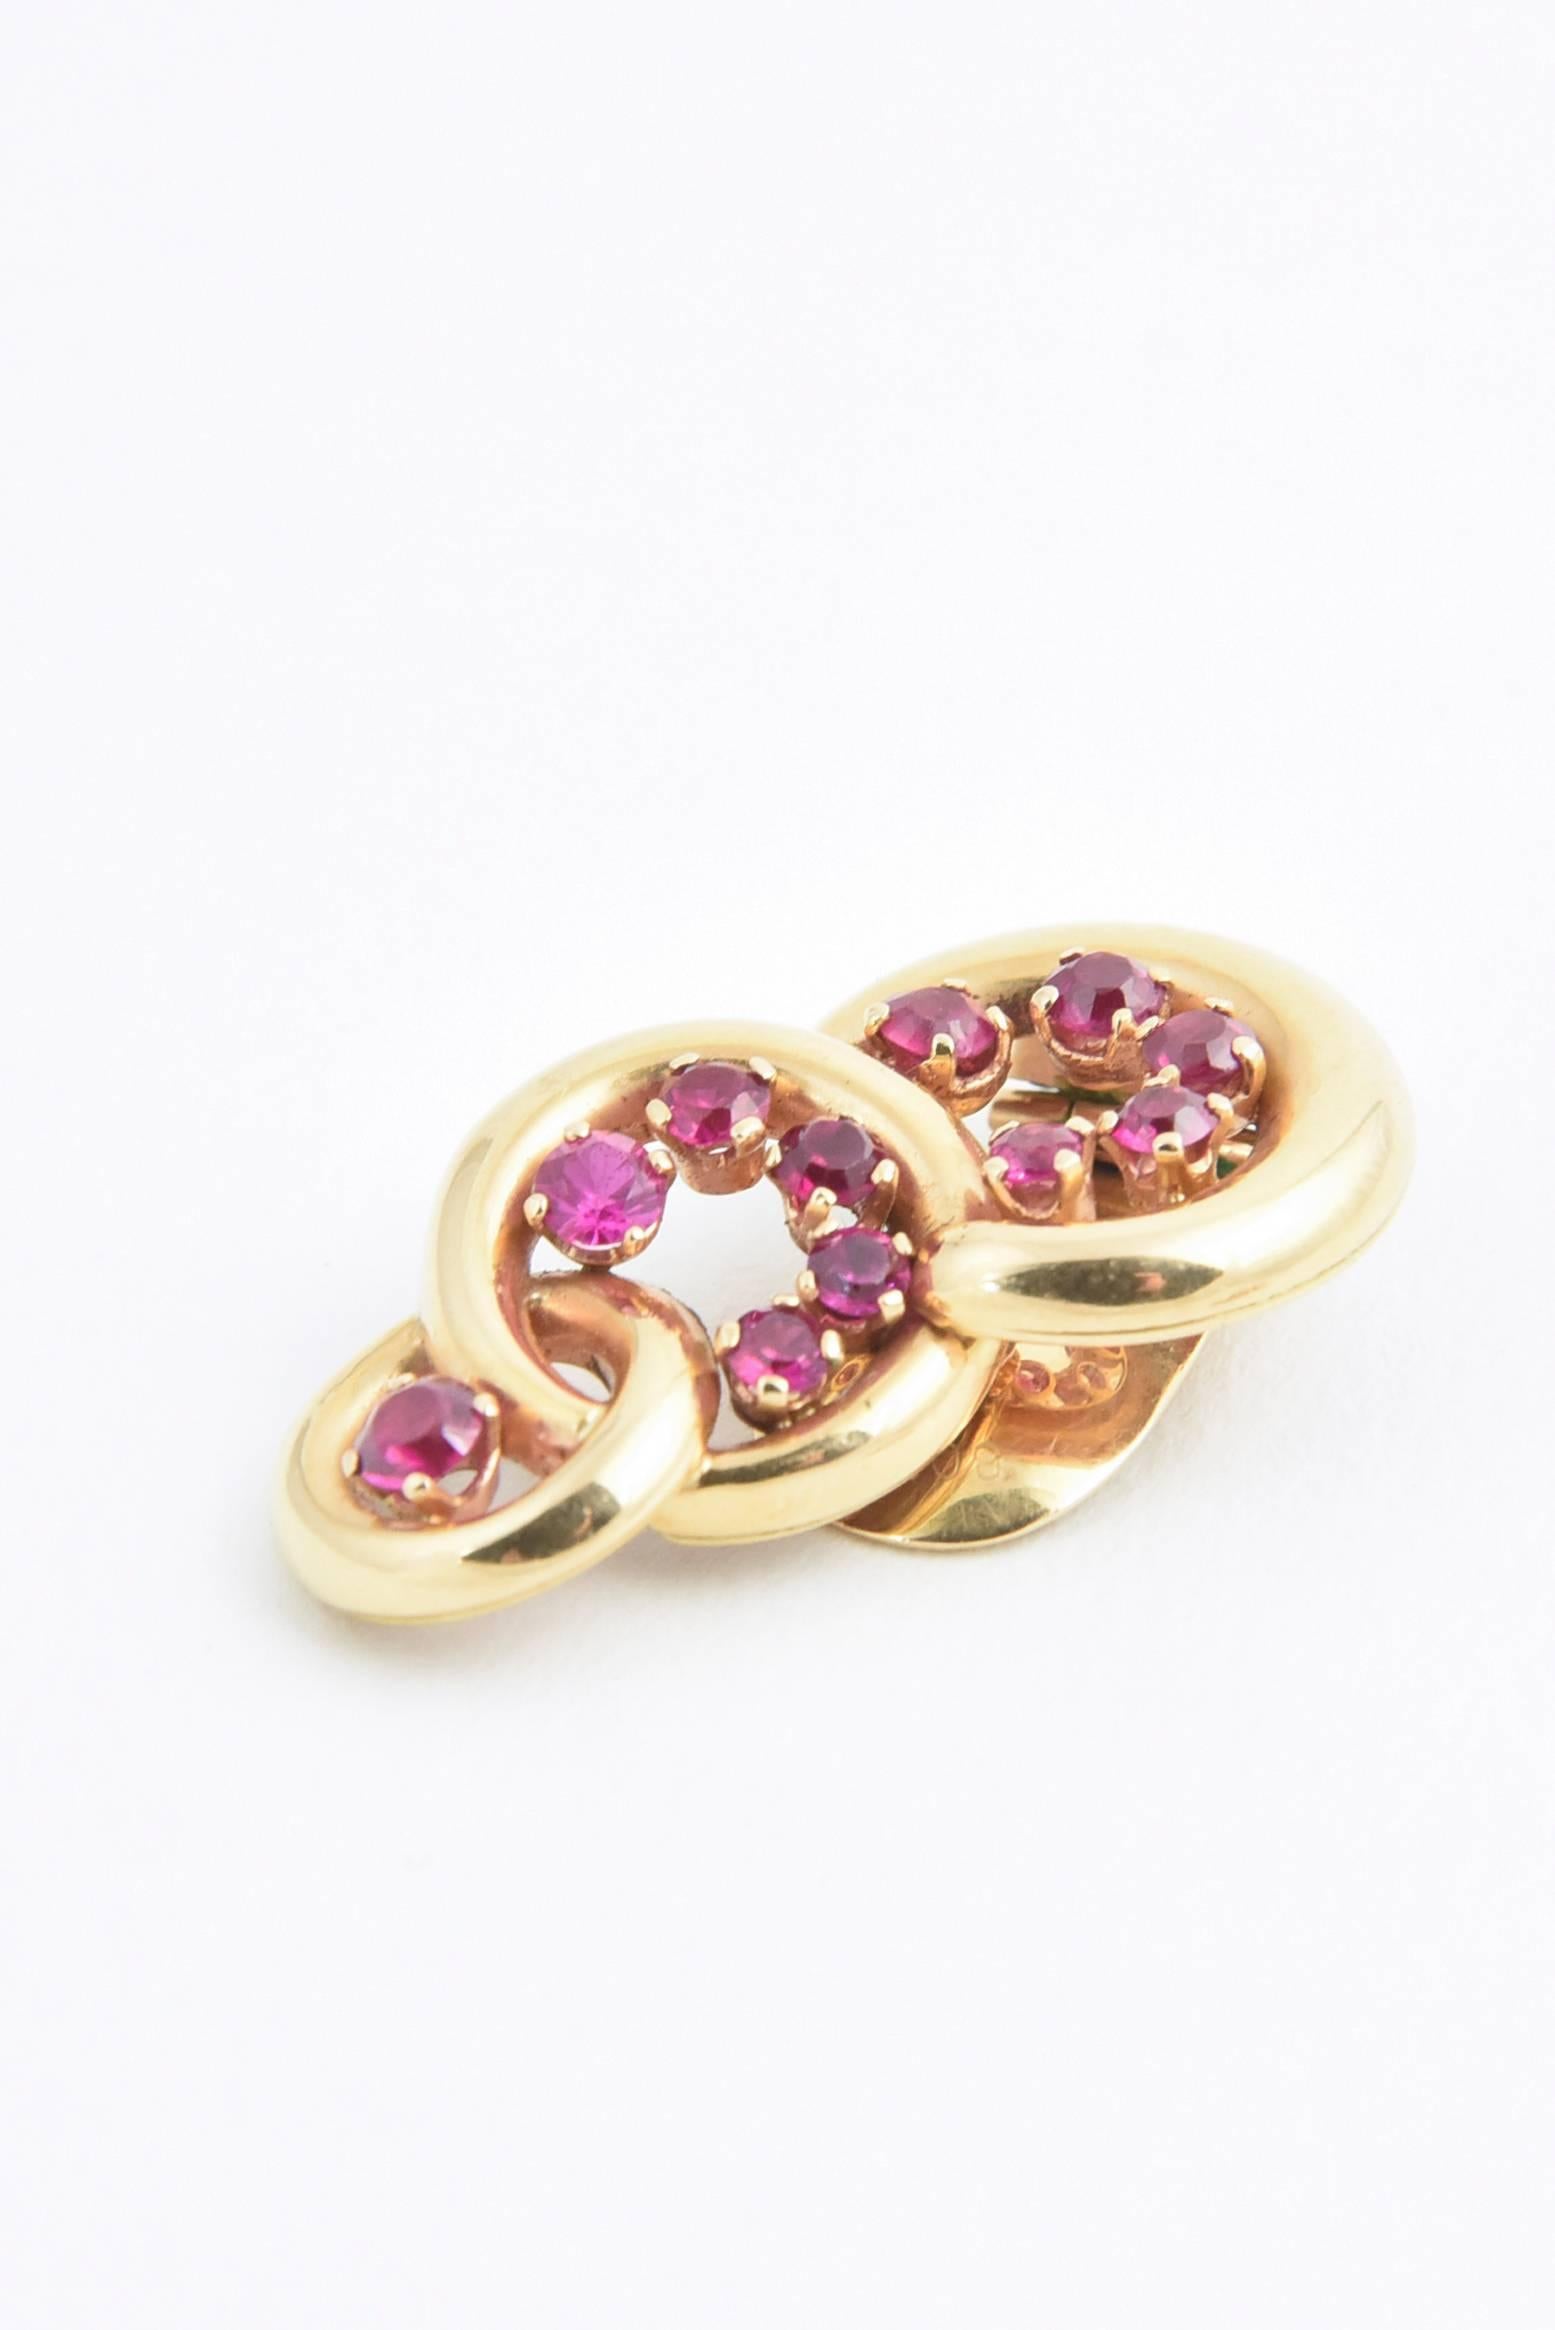 Women's Retro 1940s Interlocking Ruby and Gold Circle Clip Earrings